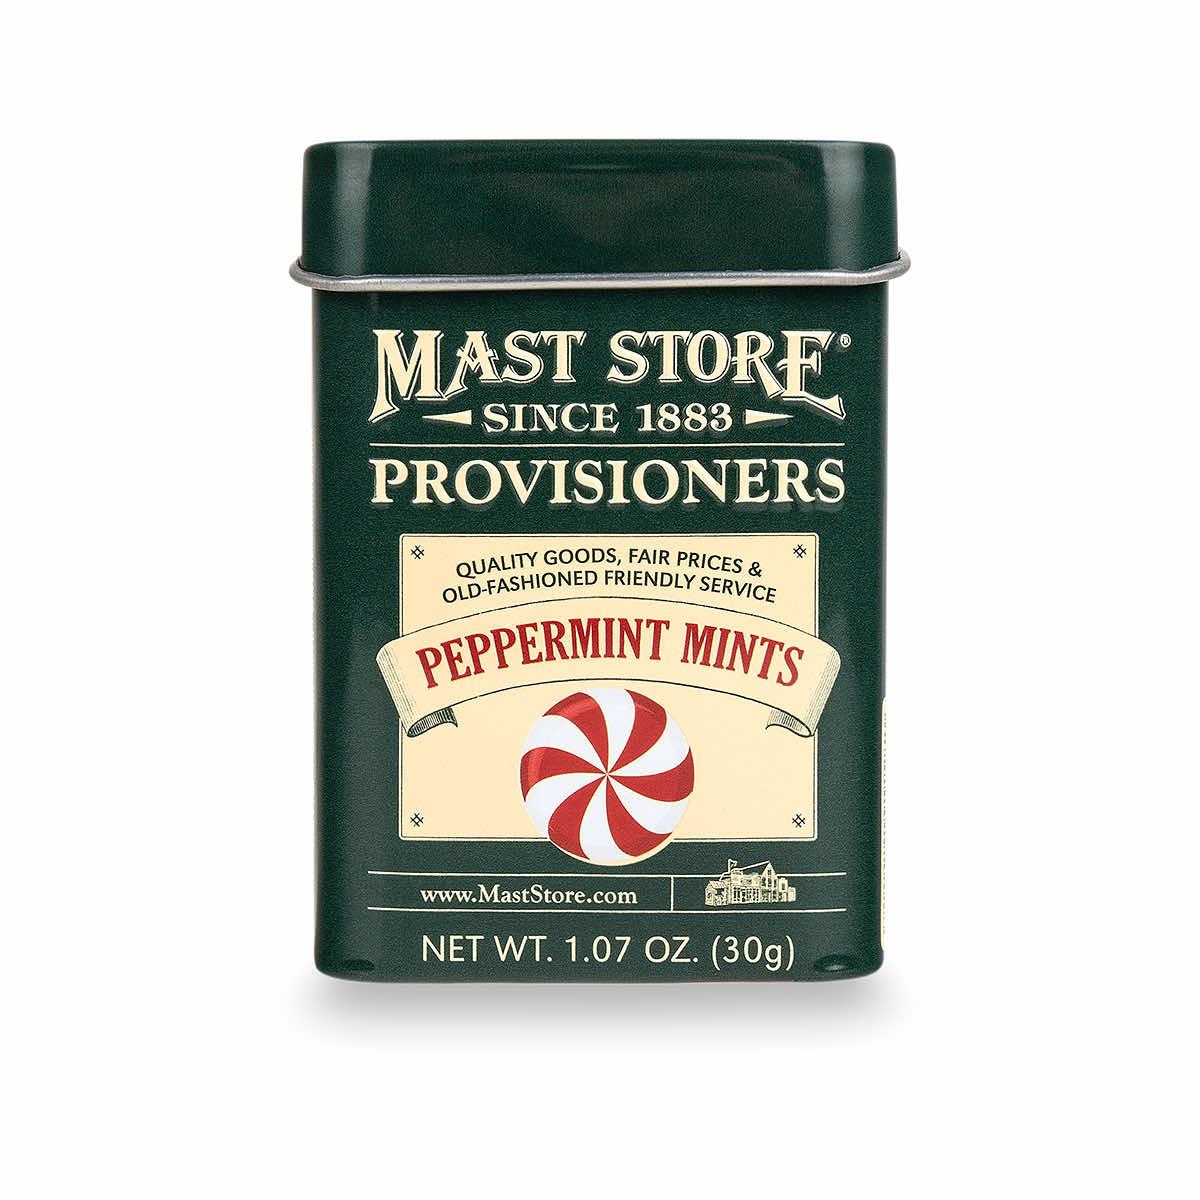  Mast Store Provisioners Peppermints